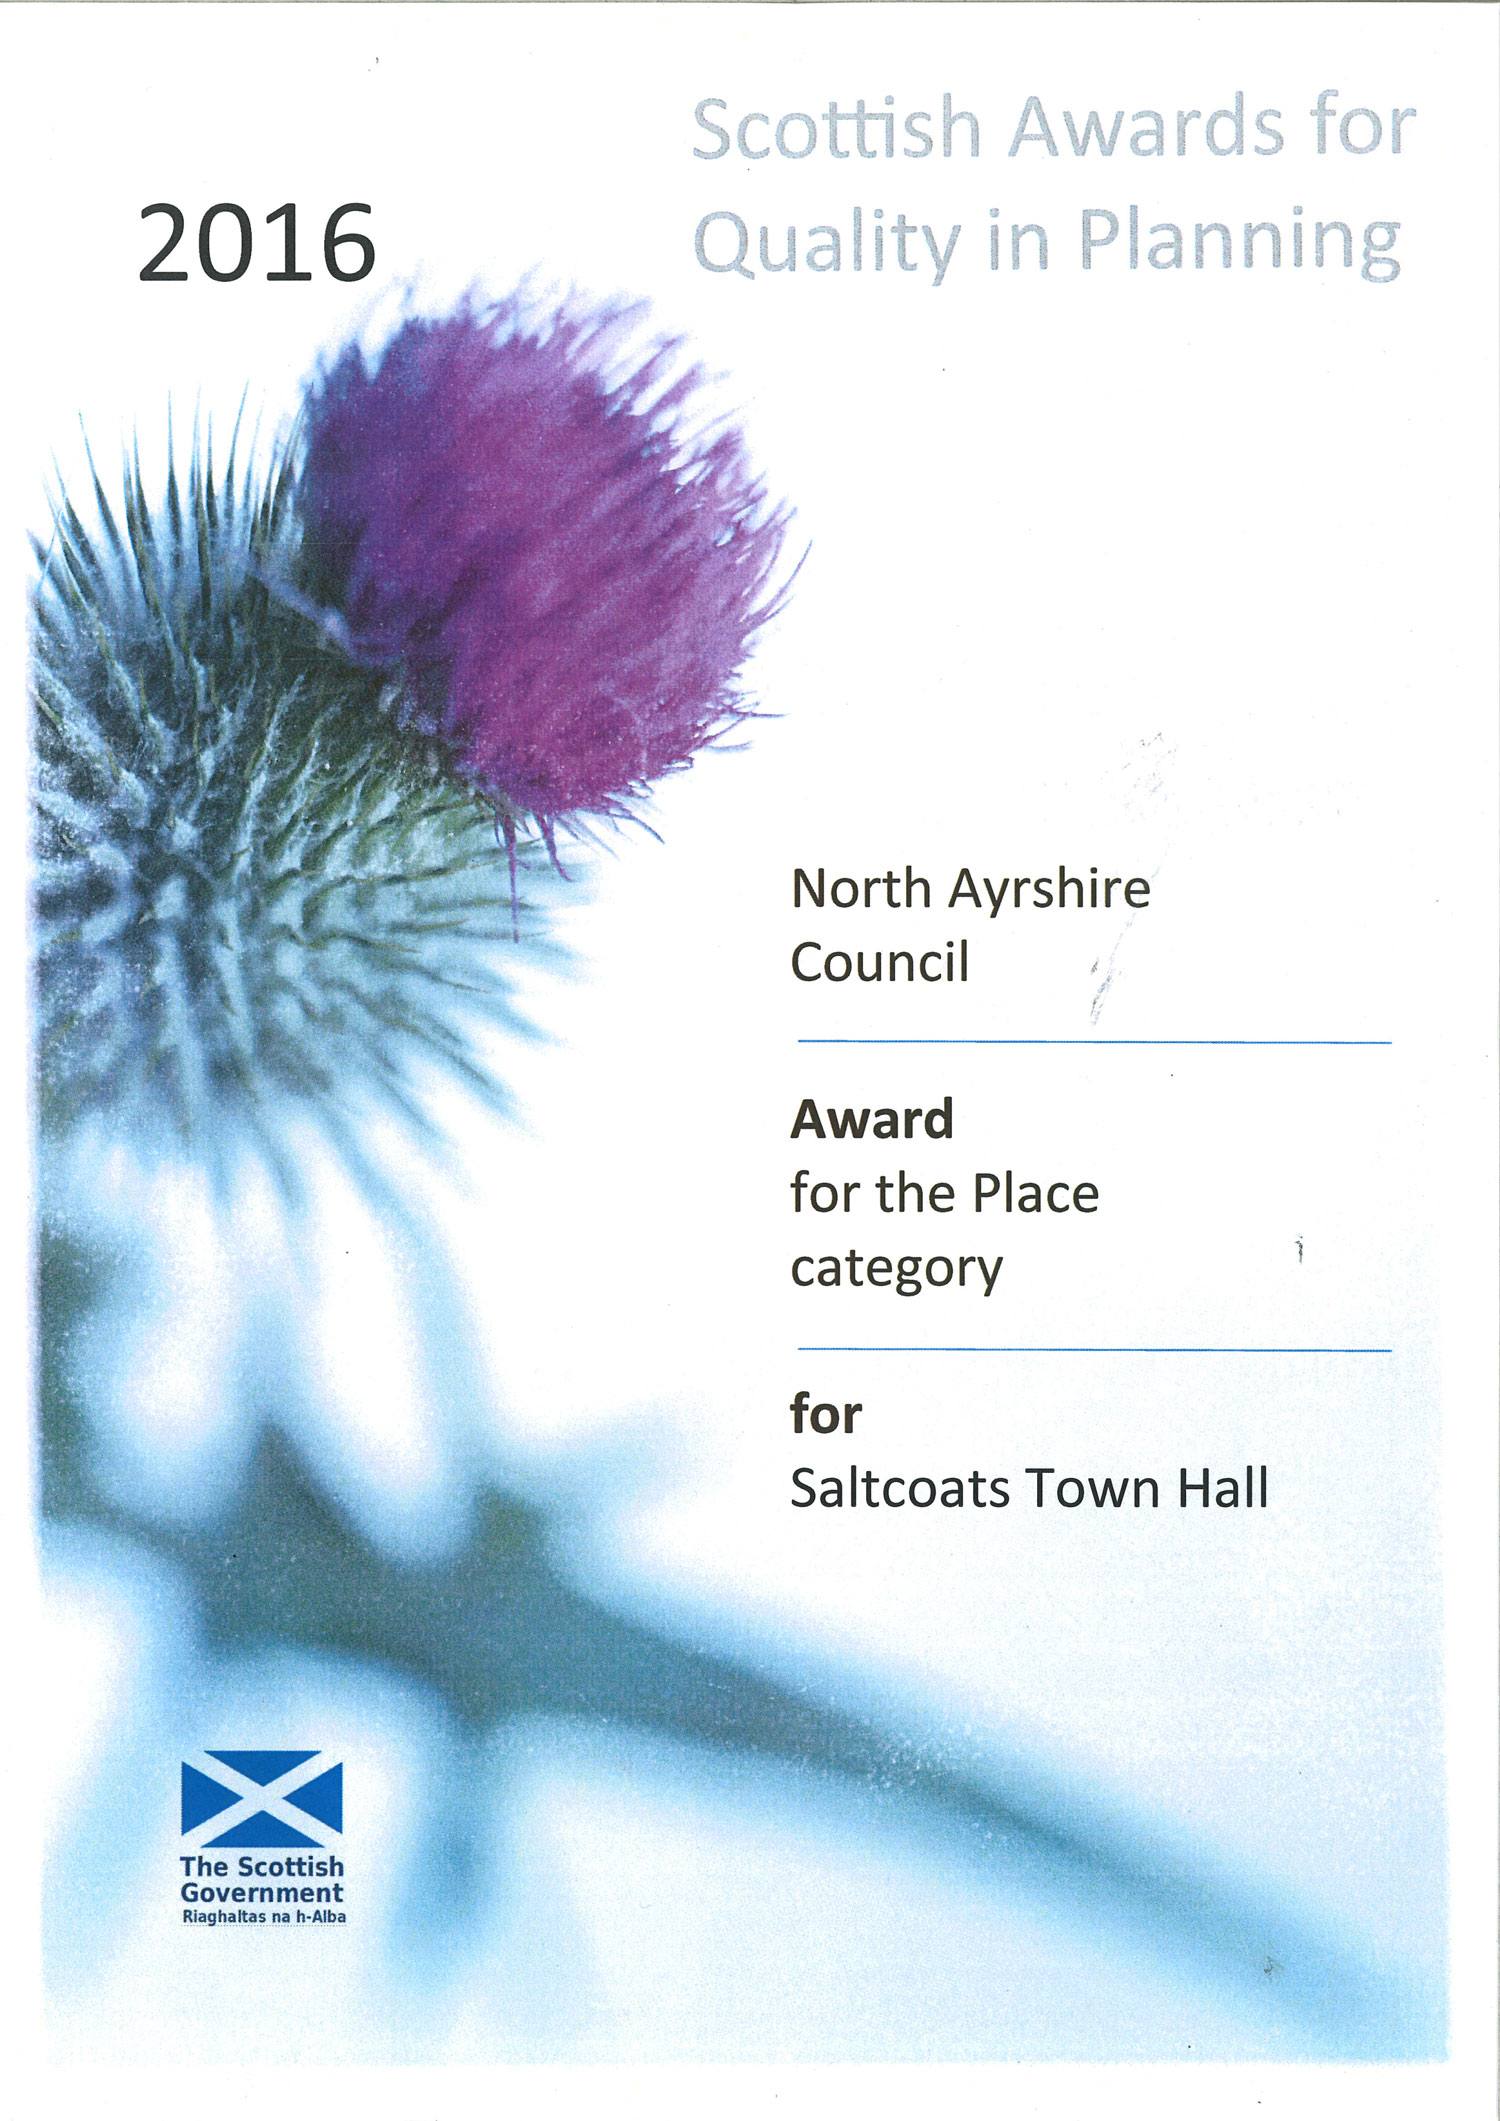 Scottish Awards for Quality in Planning 2016